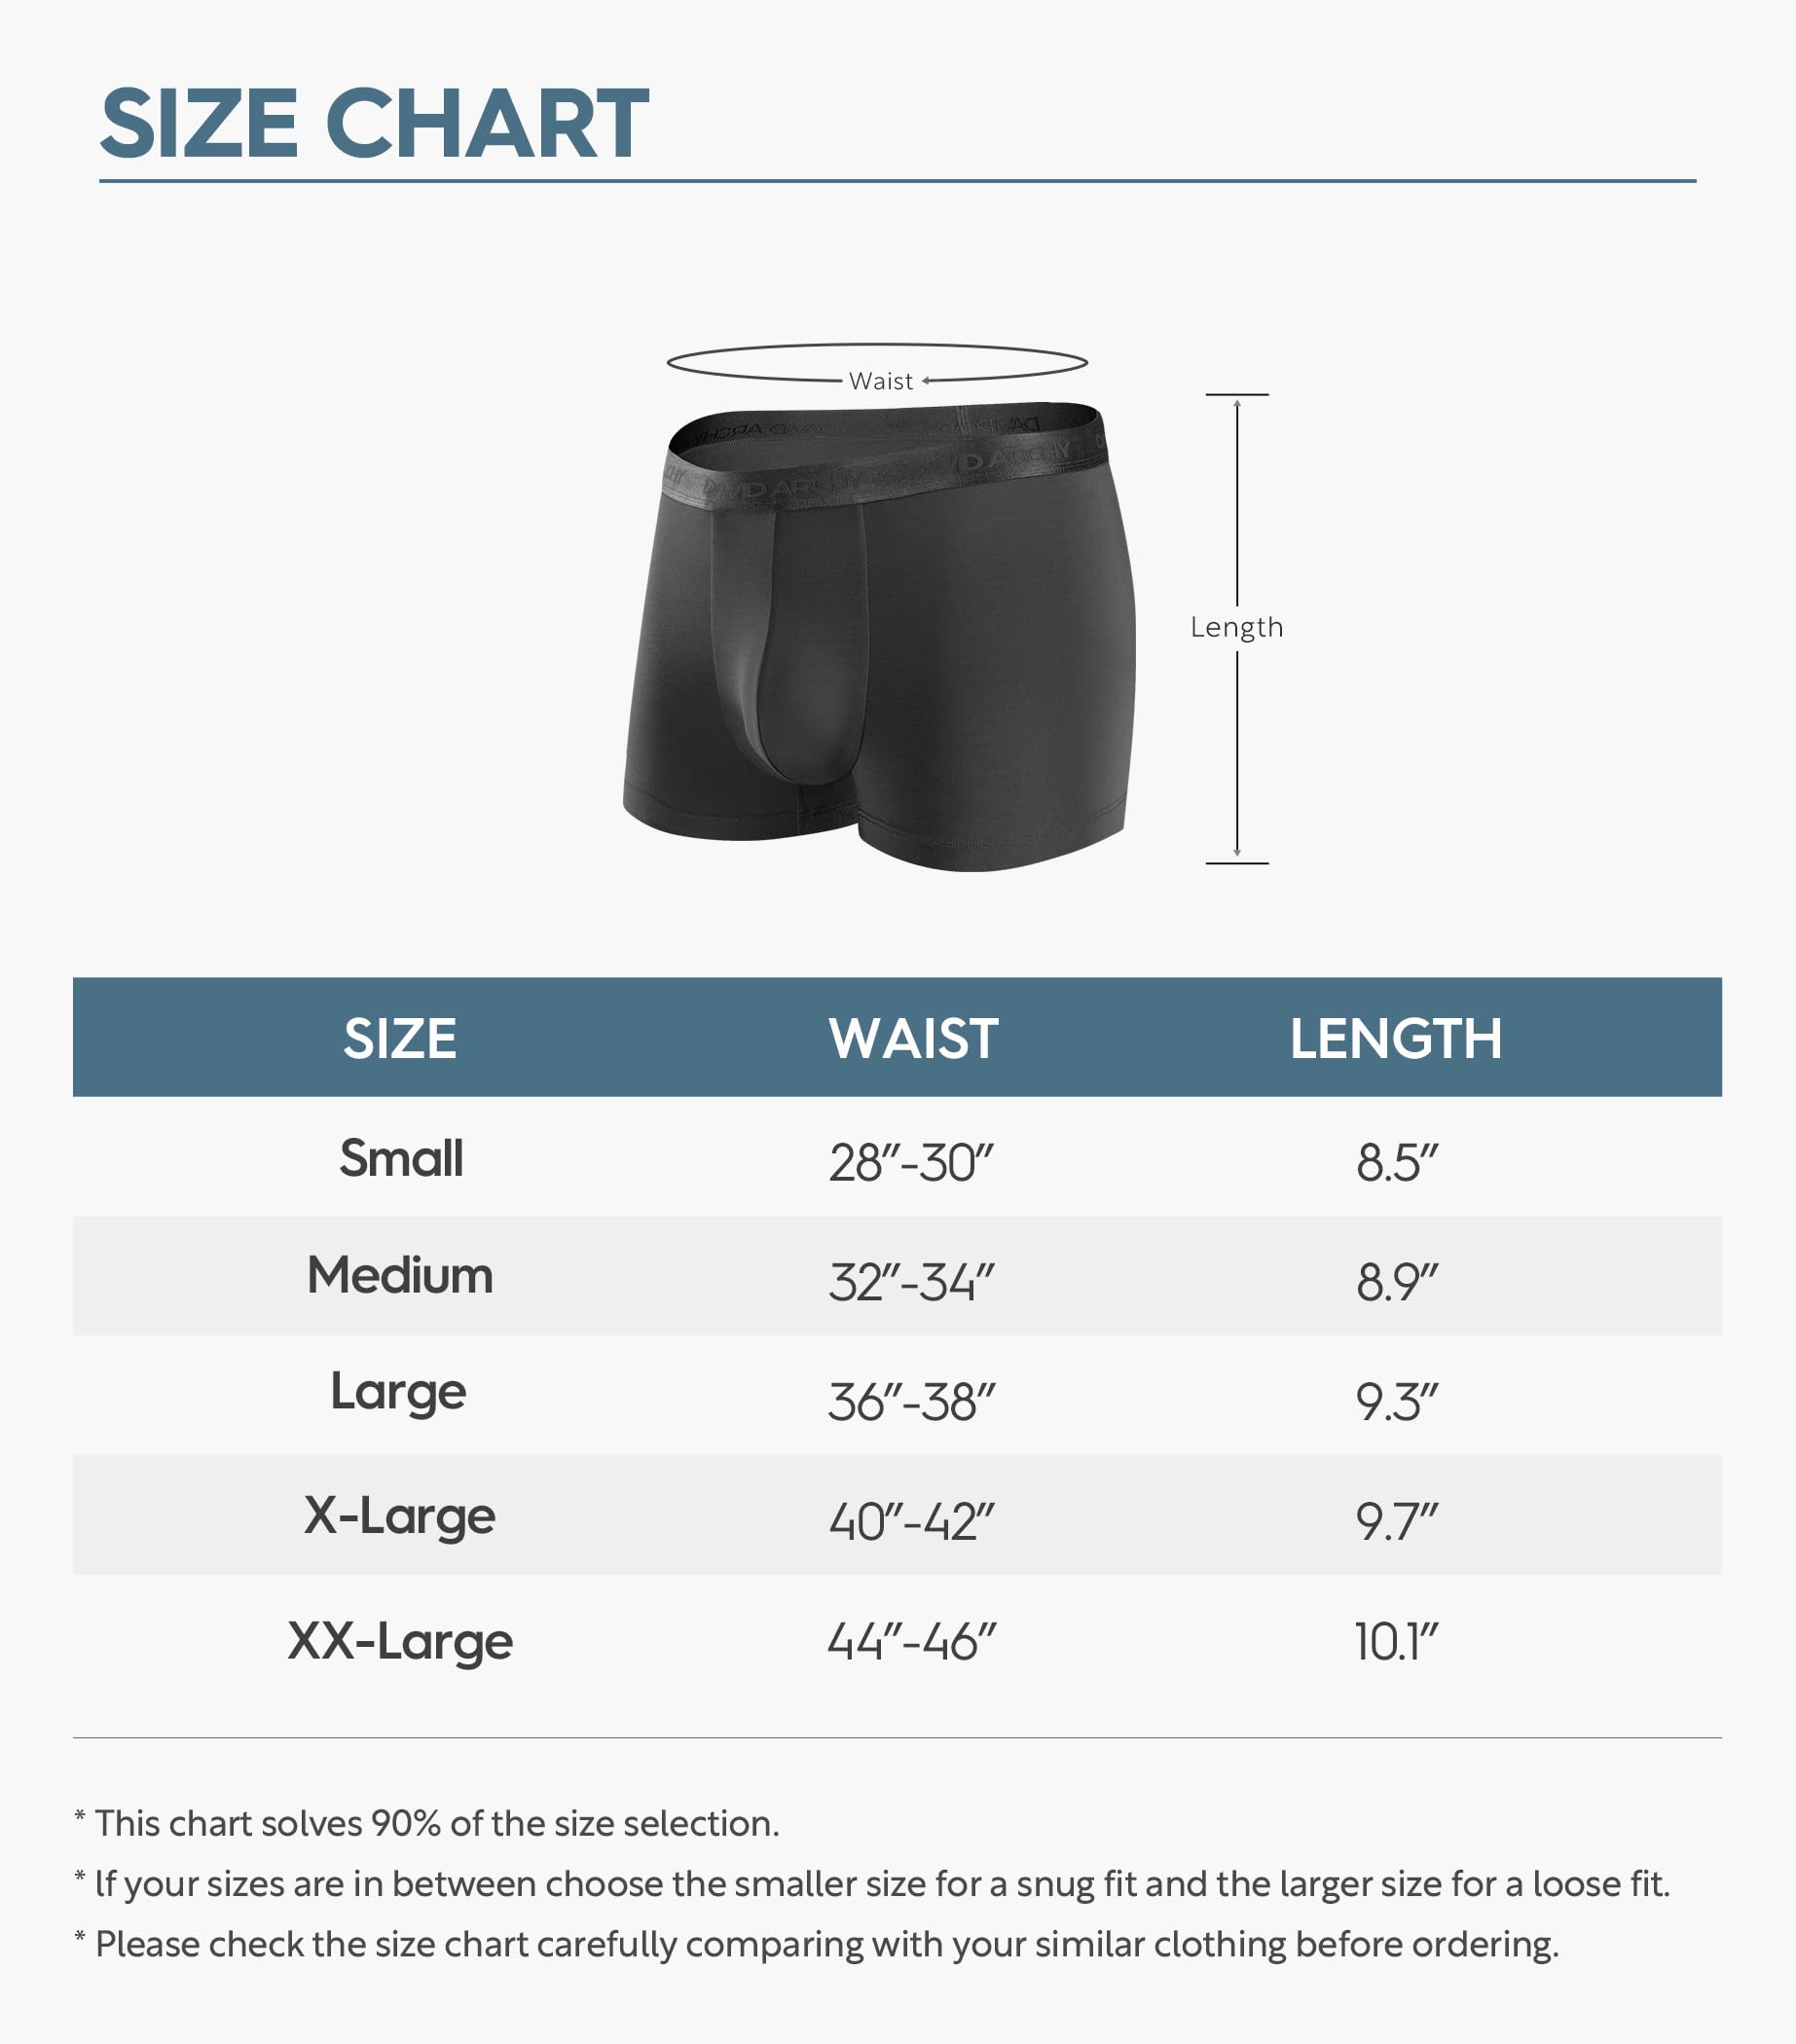 DAVID ARCHY Men's Underwear Ultra Soft Micro Modal Moisture-Wicking Boxer Briefs or Trunks for Men, 3 or 4 Packs